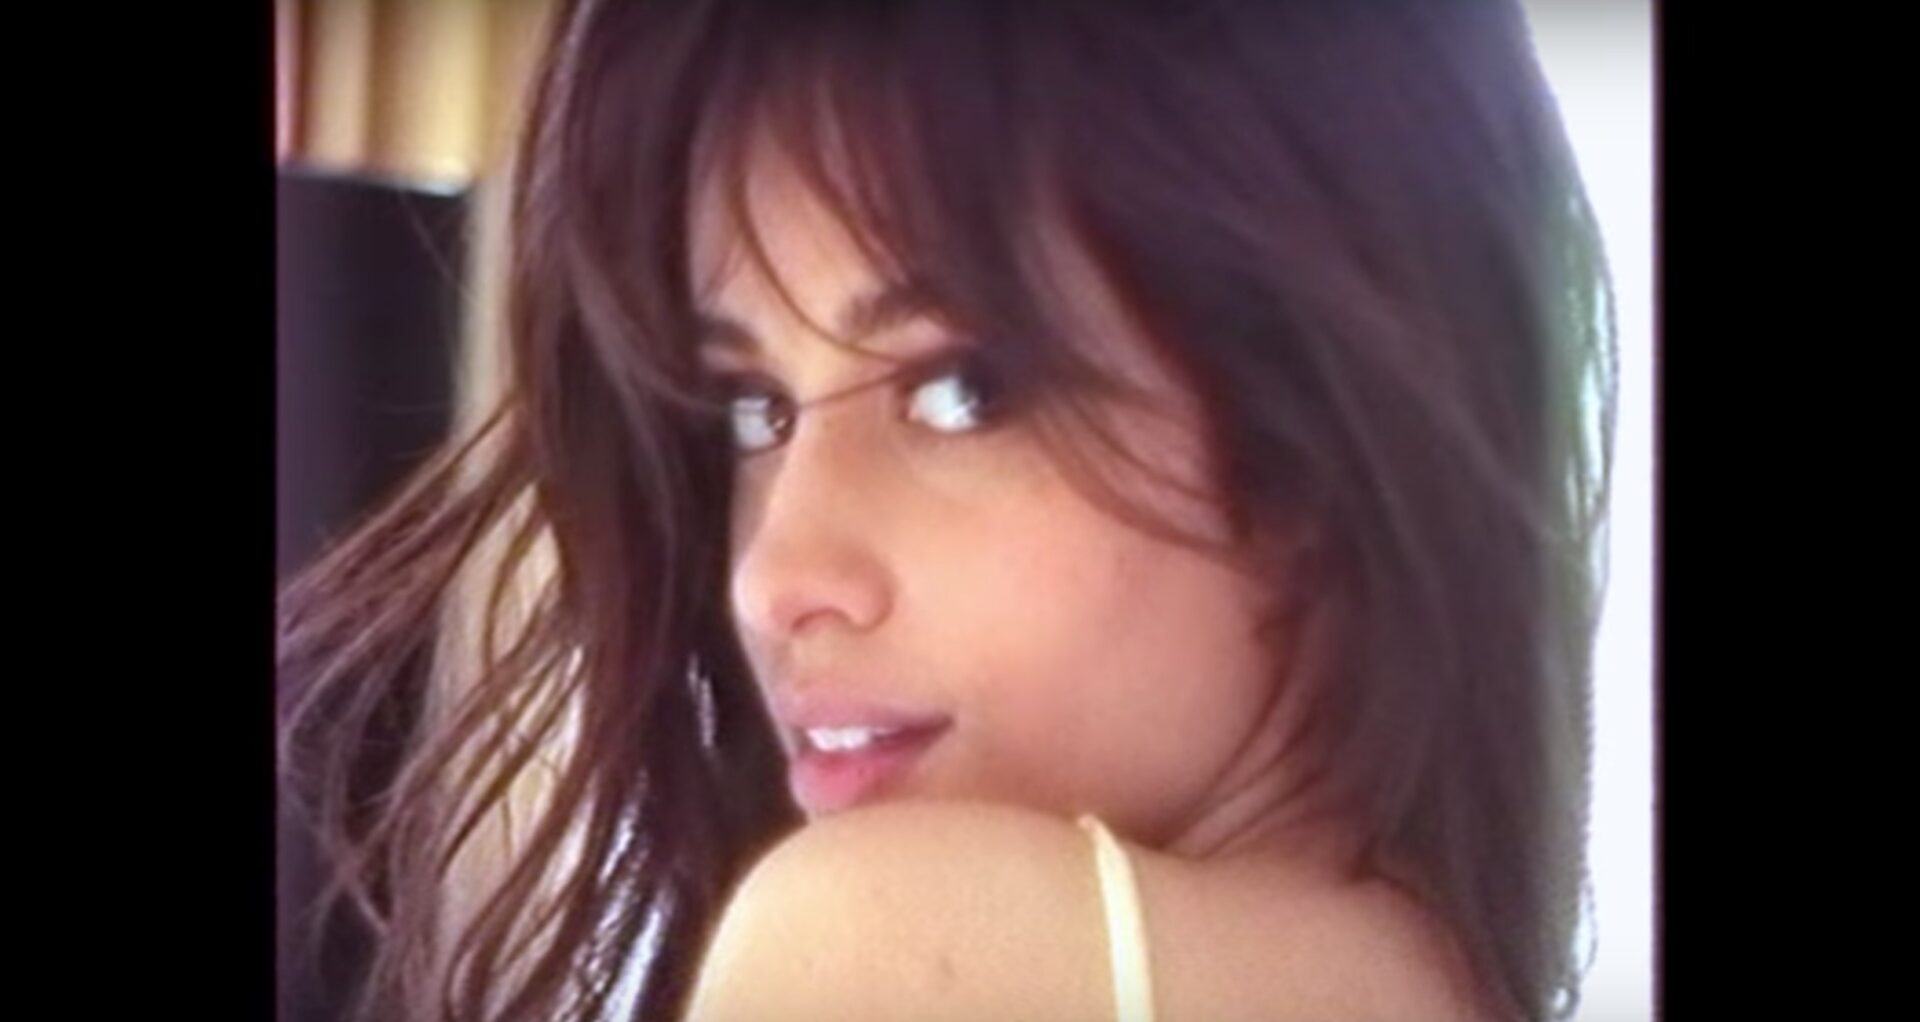 Camila Cabello releases stunning music video for “Never Be the Same”